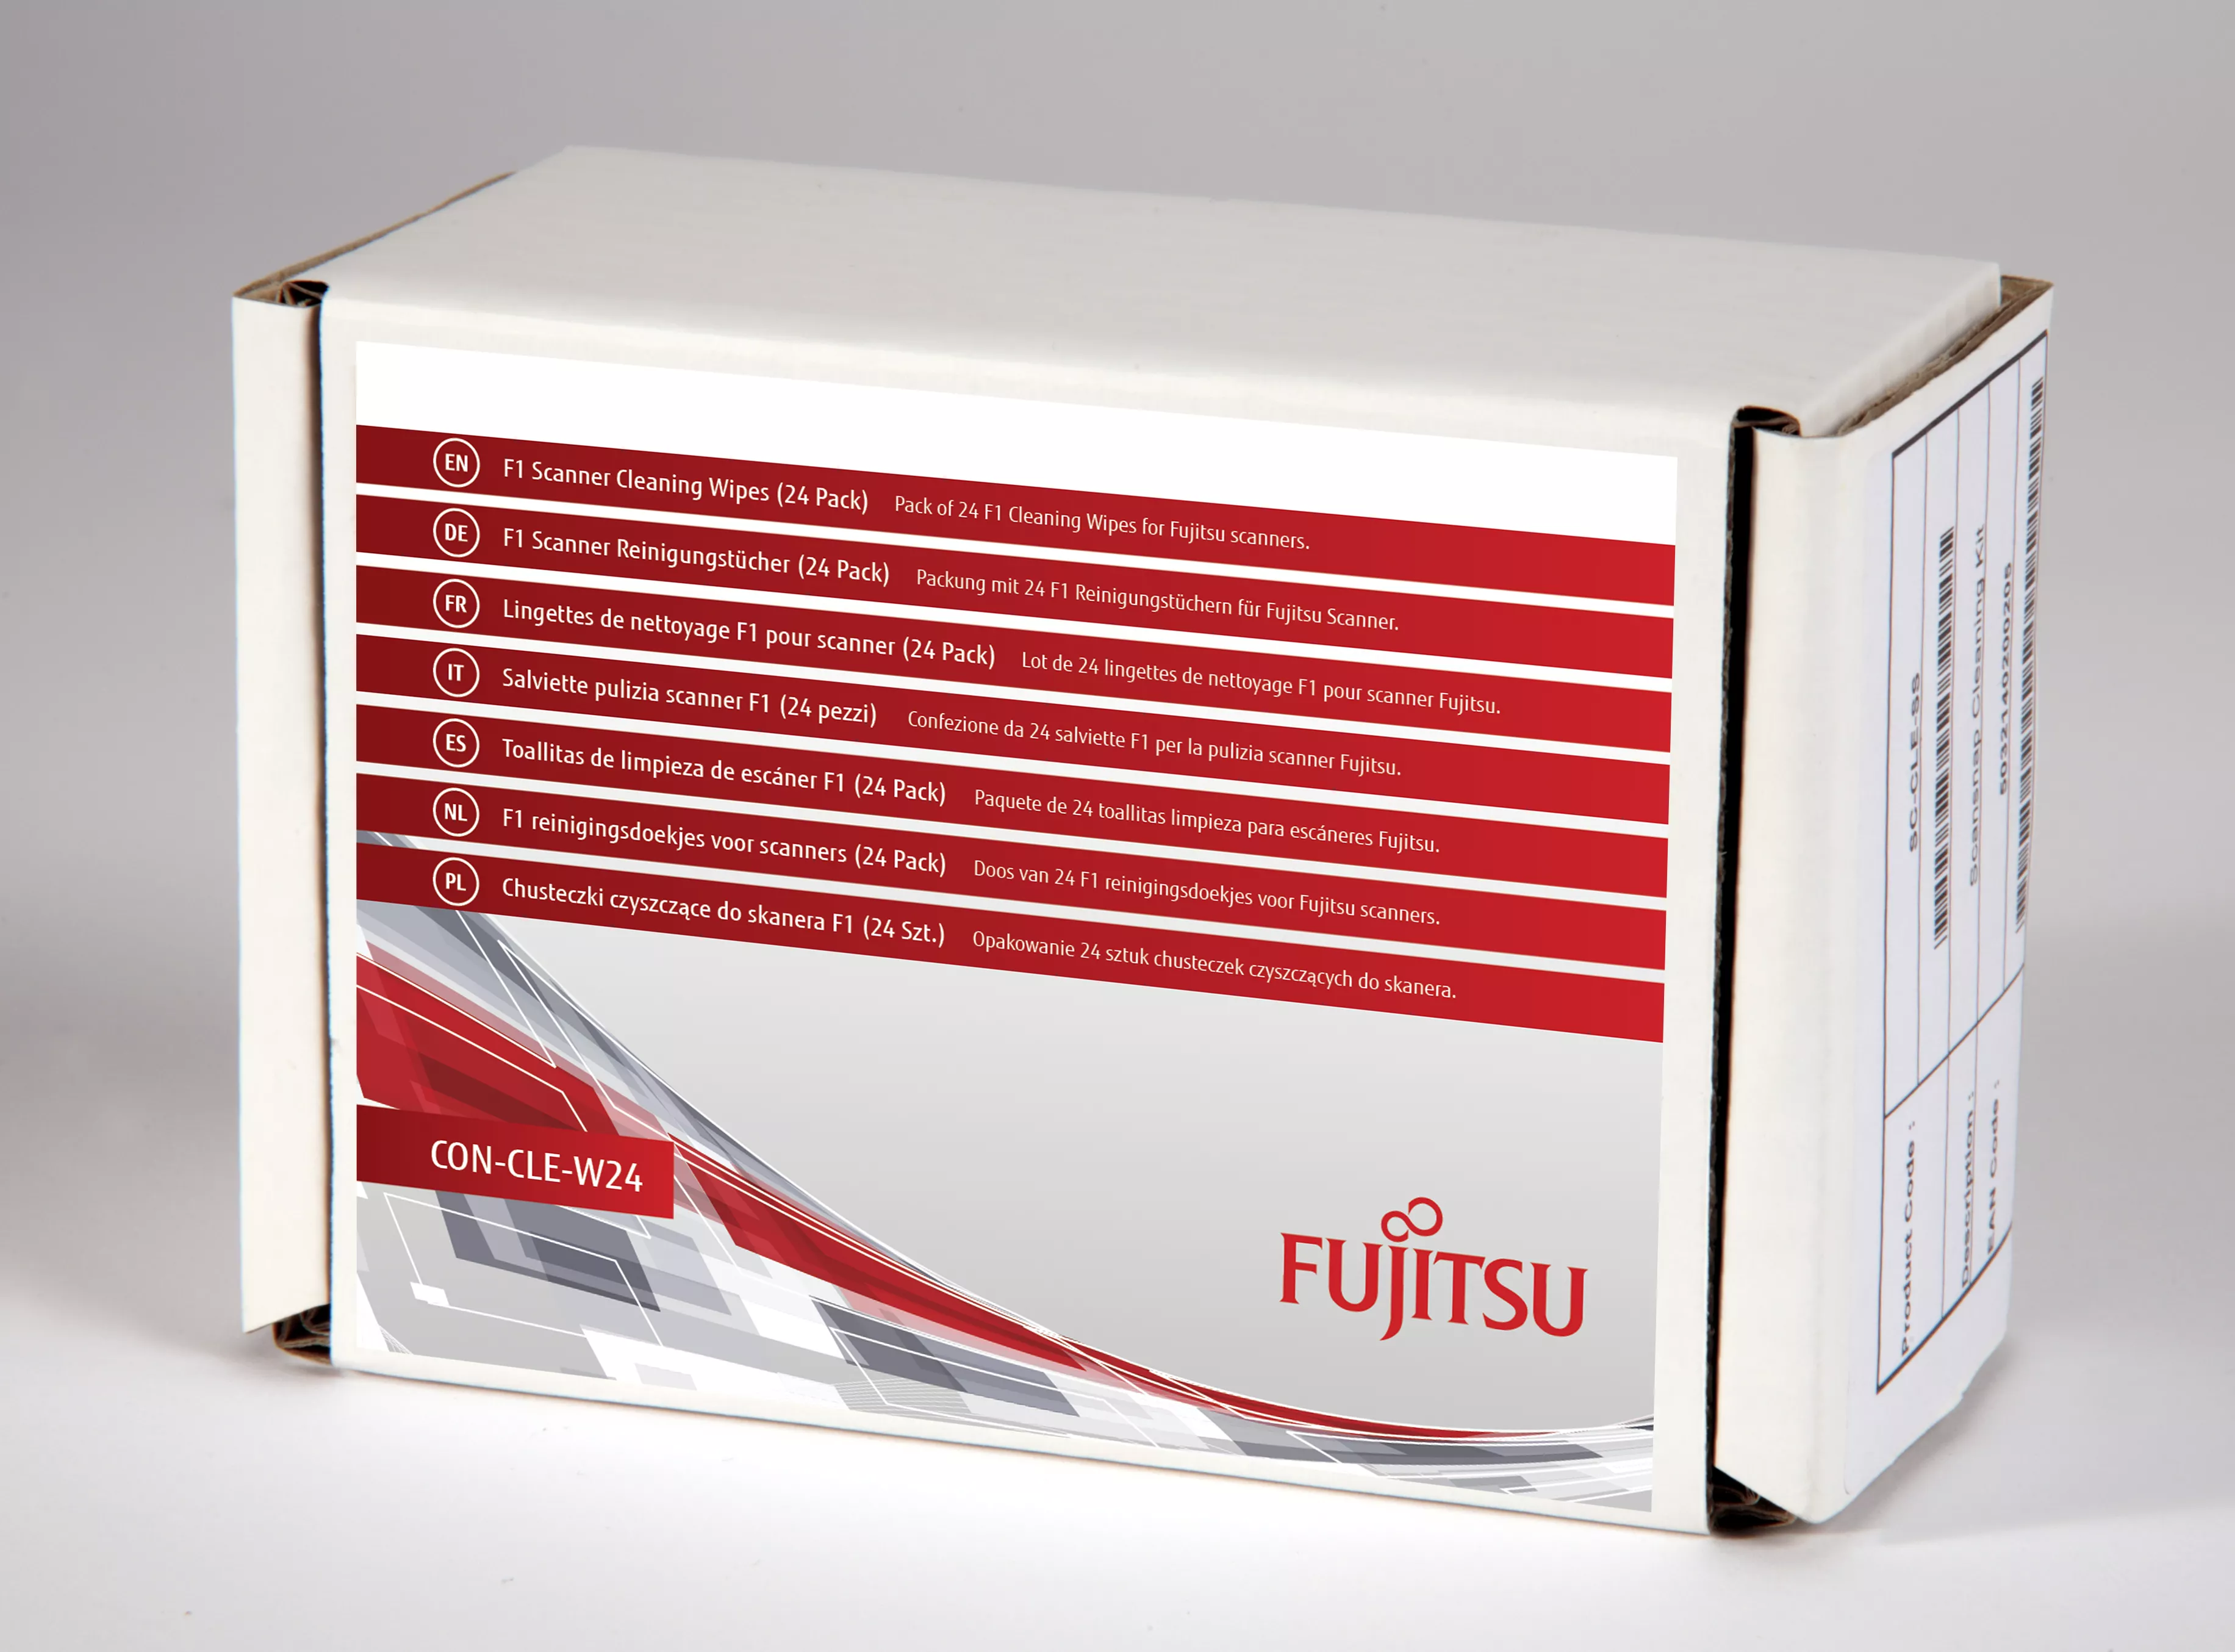 Achat Autres consommables FUJITSU Pack of 24 F1 Cleaning Wipes for Fujitsu scanners